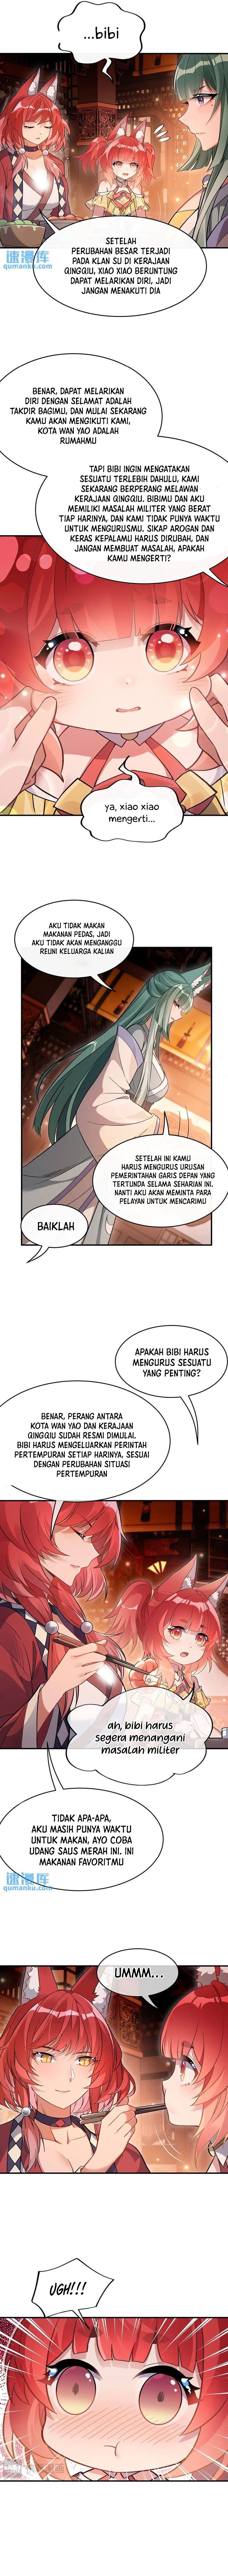 Dilarang COPAS - situs resmi www.mangacanblog.com - Komik my female apprentices are all big shots from the future 210 - chapter 210 211 Indonesia my female apprentices are all big shots from the future 210 - chapter 210 Terbaru 2|Baca Manga Komik Indonesia|Mangacan